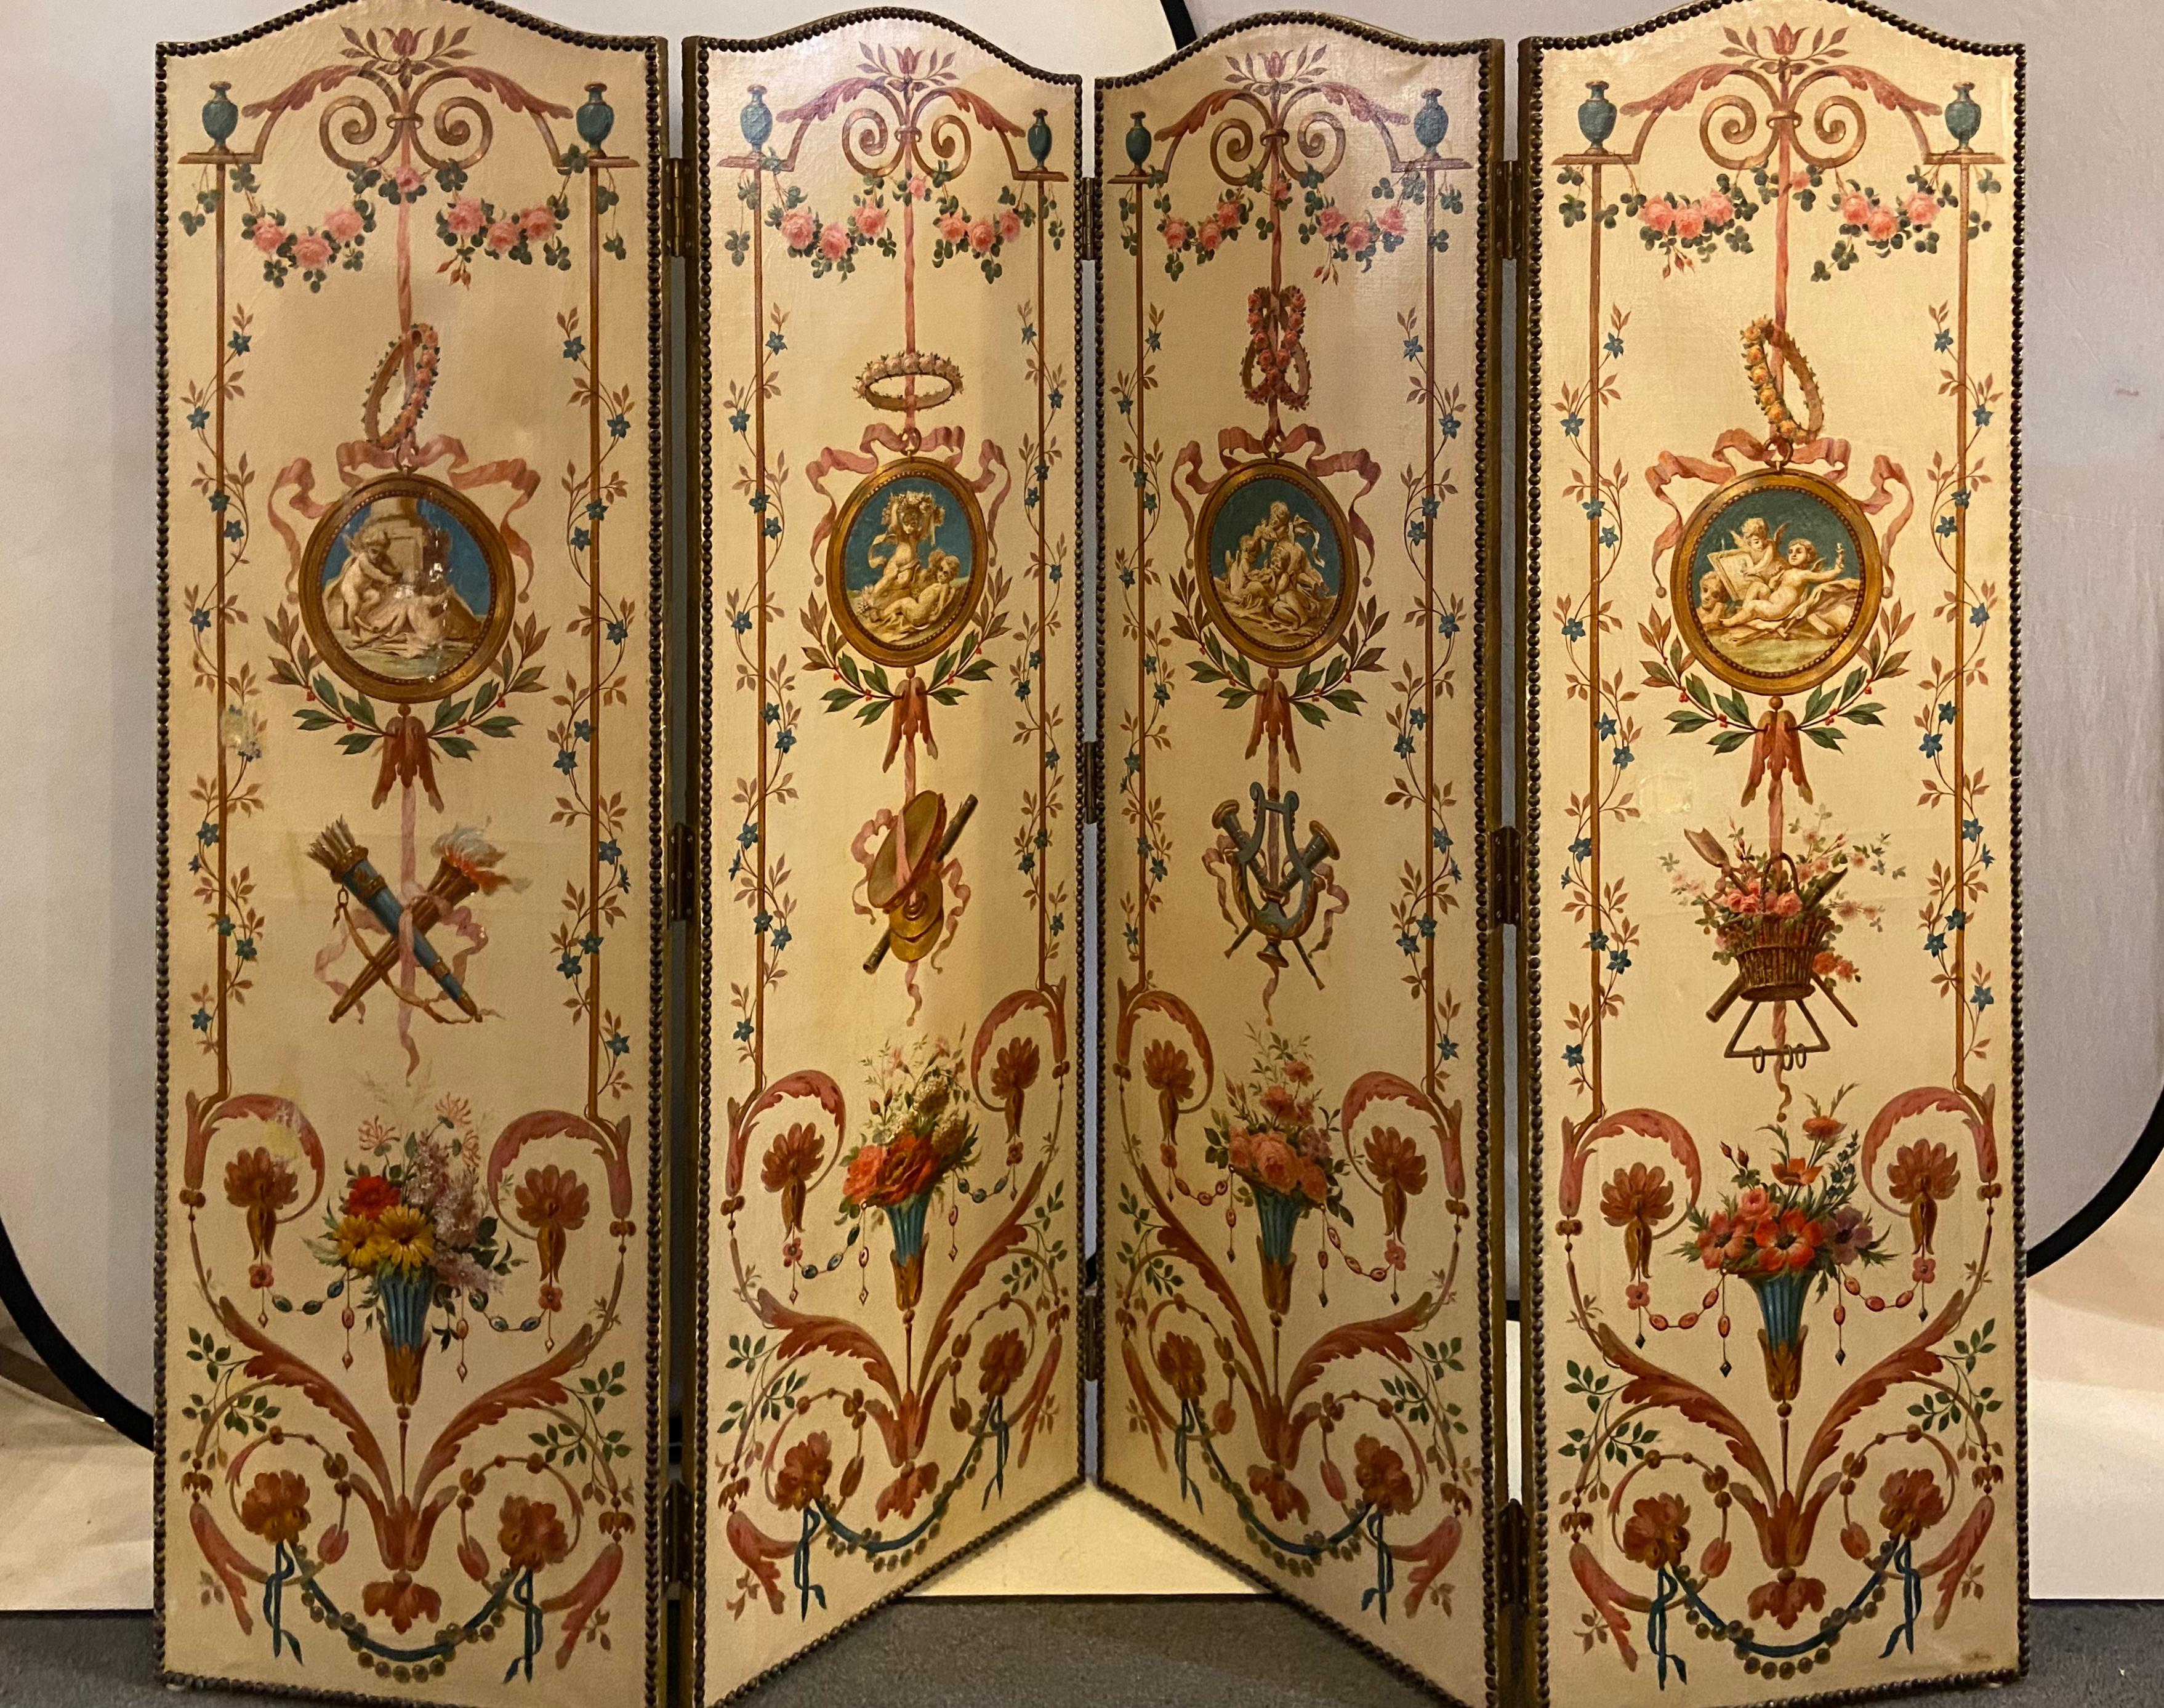 19th century French oil canvas, hand painted four-panel room divider/screen
The divider has four finely painted folding panels, each panel features a portrait of cherubs in a floral background in a glamorous pink. The back of the panels are painted